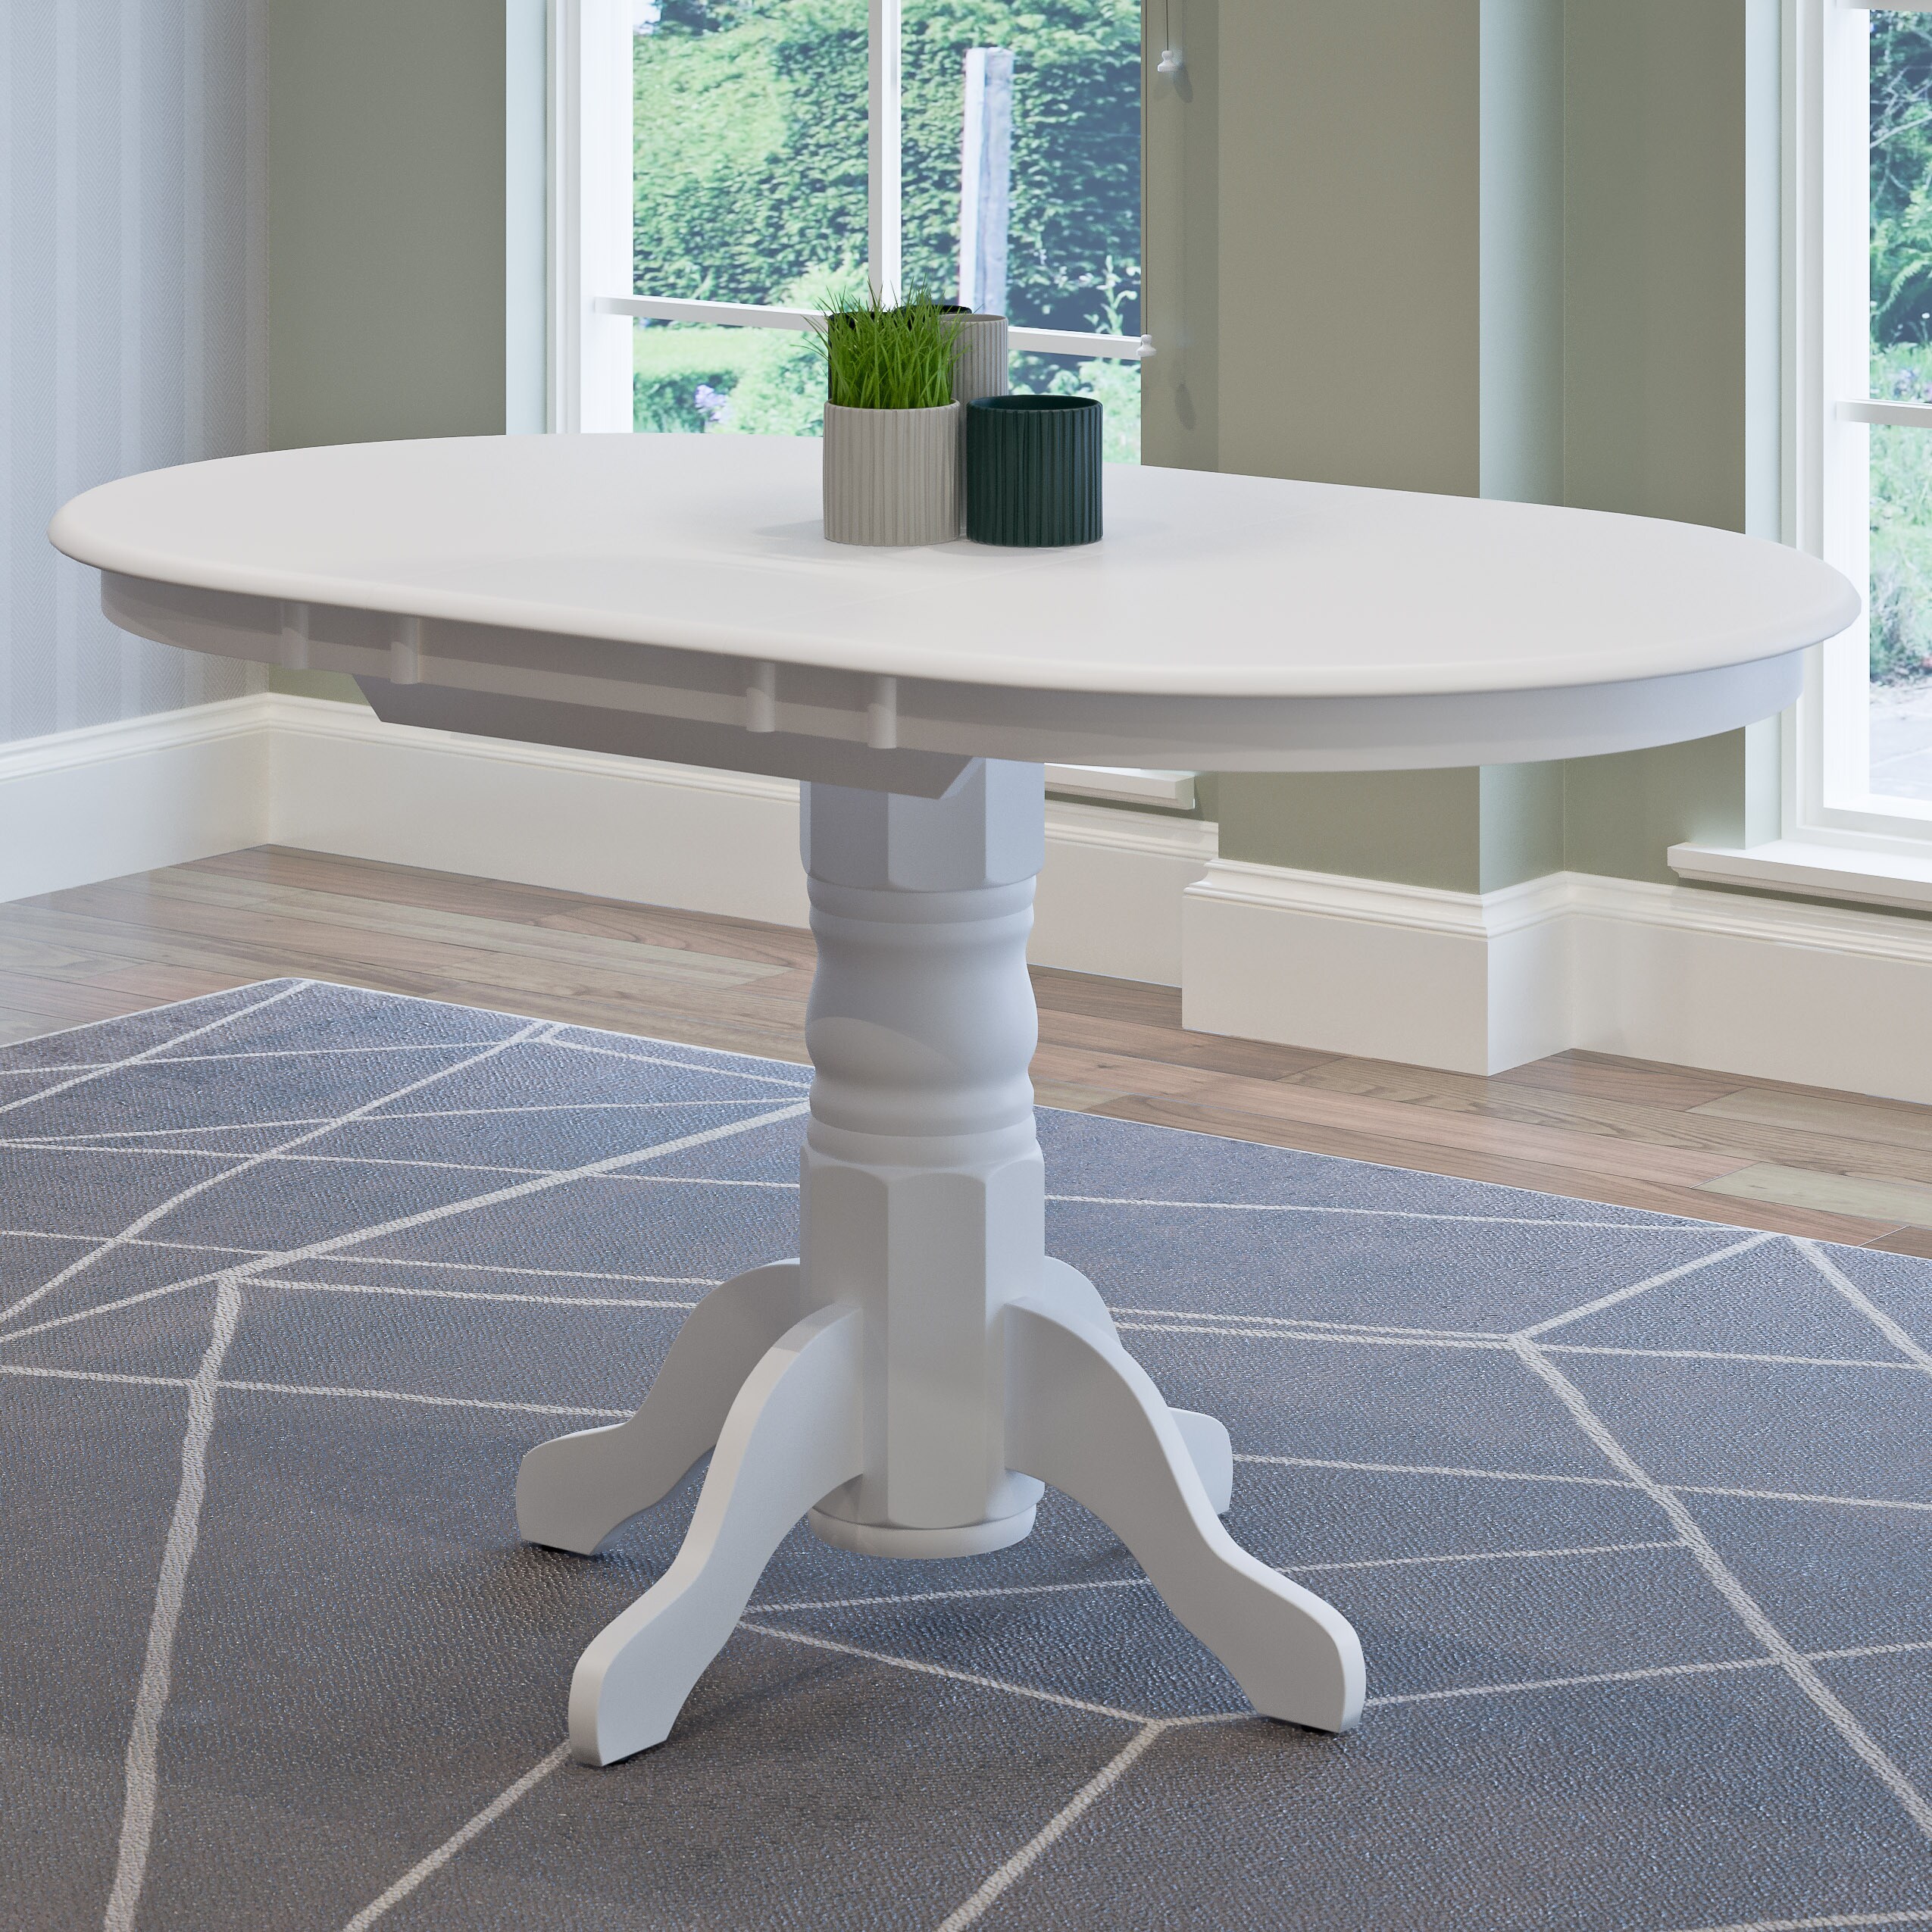 The Gray Barn Badger Hill White Extendable Oval Pedestal Dining Table -  Overstock - 15439136